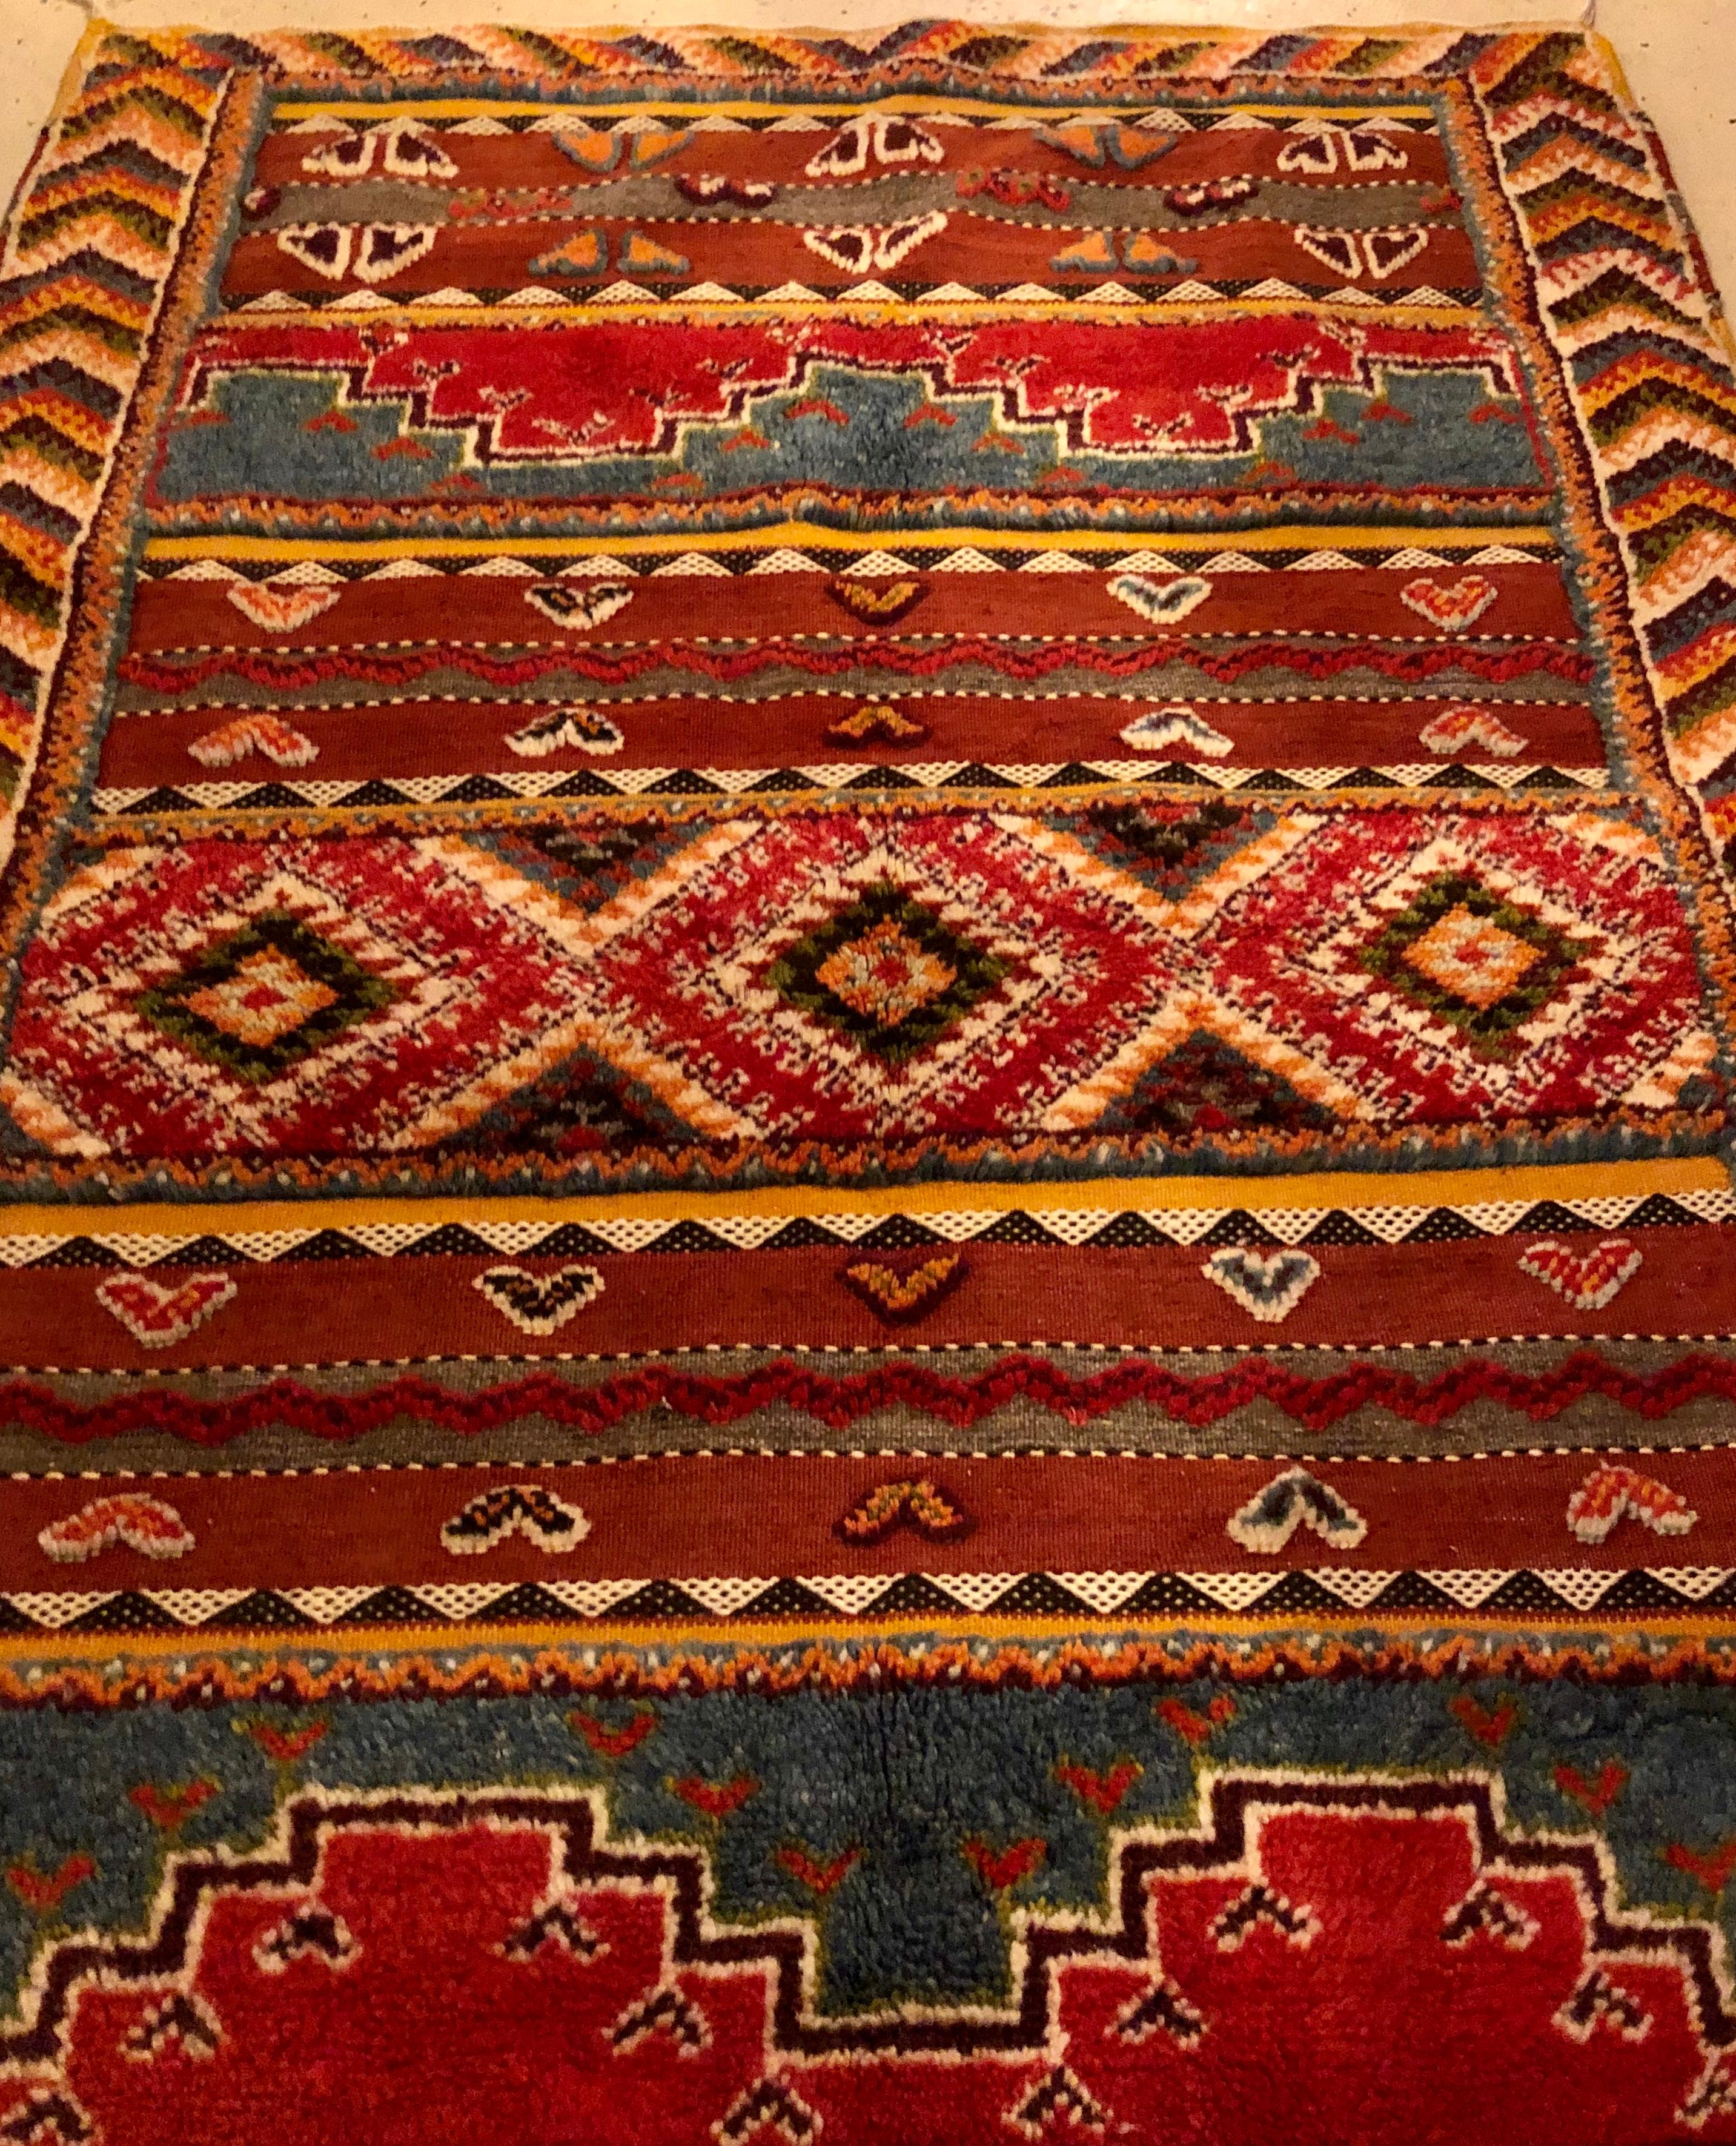 Late 20th Century Vintage Moroccan Rug or Carpet, Handwoven Organic Wool Rug with Tribal Design